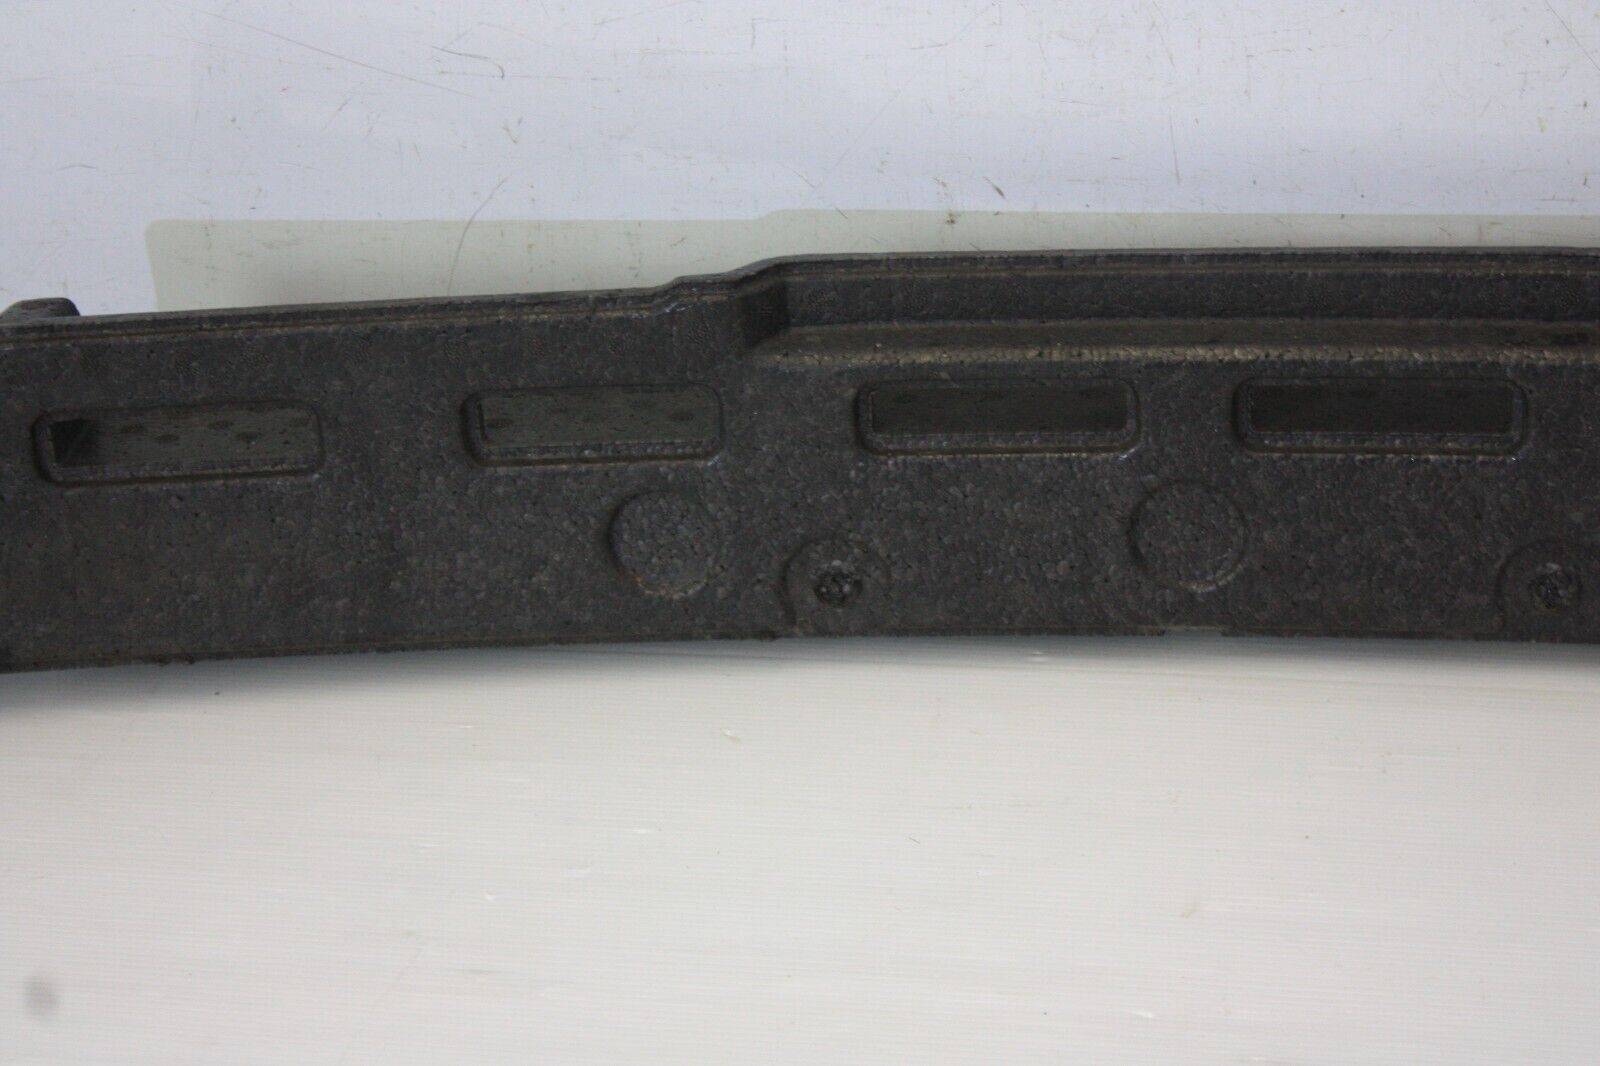 Toyota-Auris-Front-Bumper-Impact-Absorber-52611-02260B-Genuine-175611739428-11